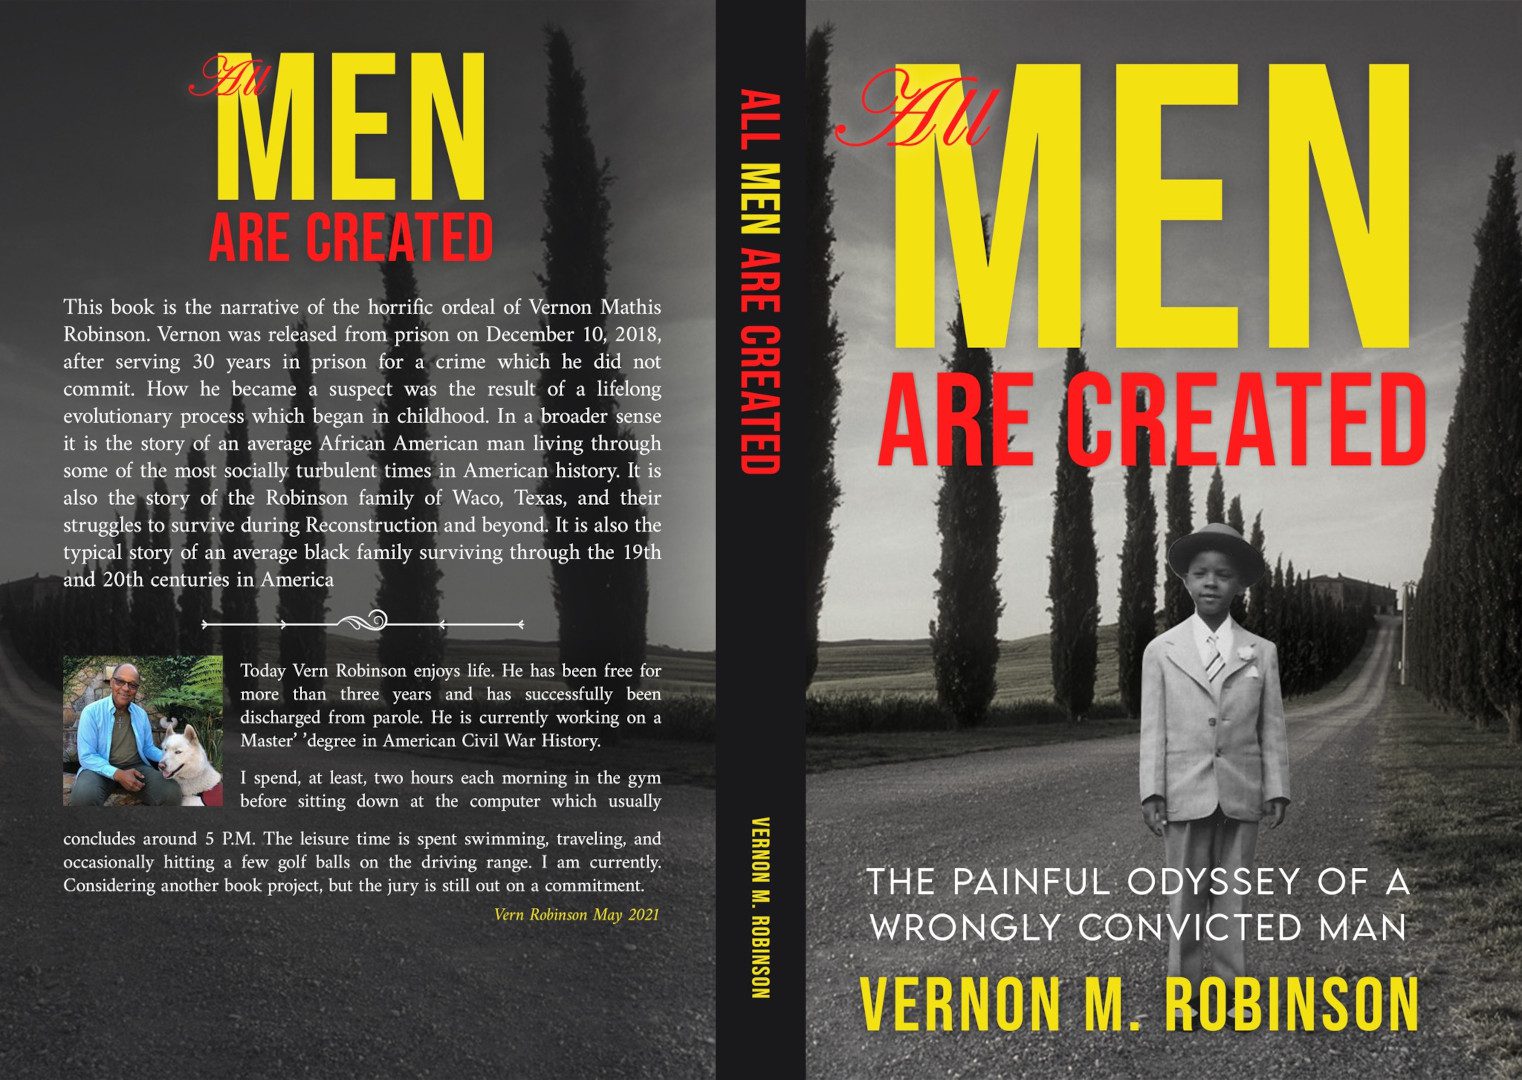 A book cover with the title of men are created.